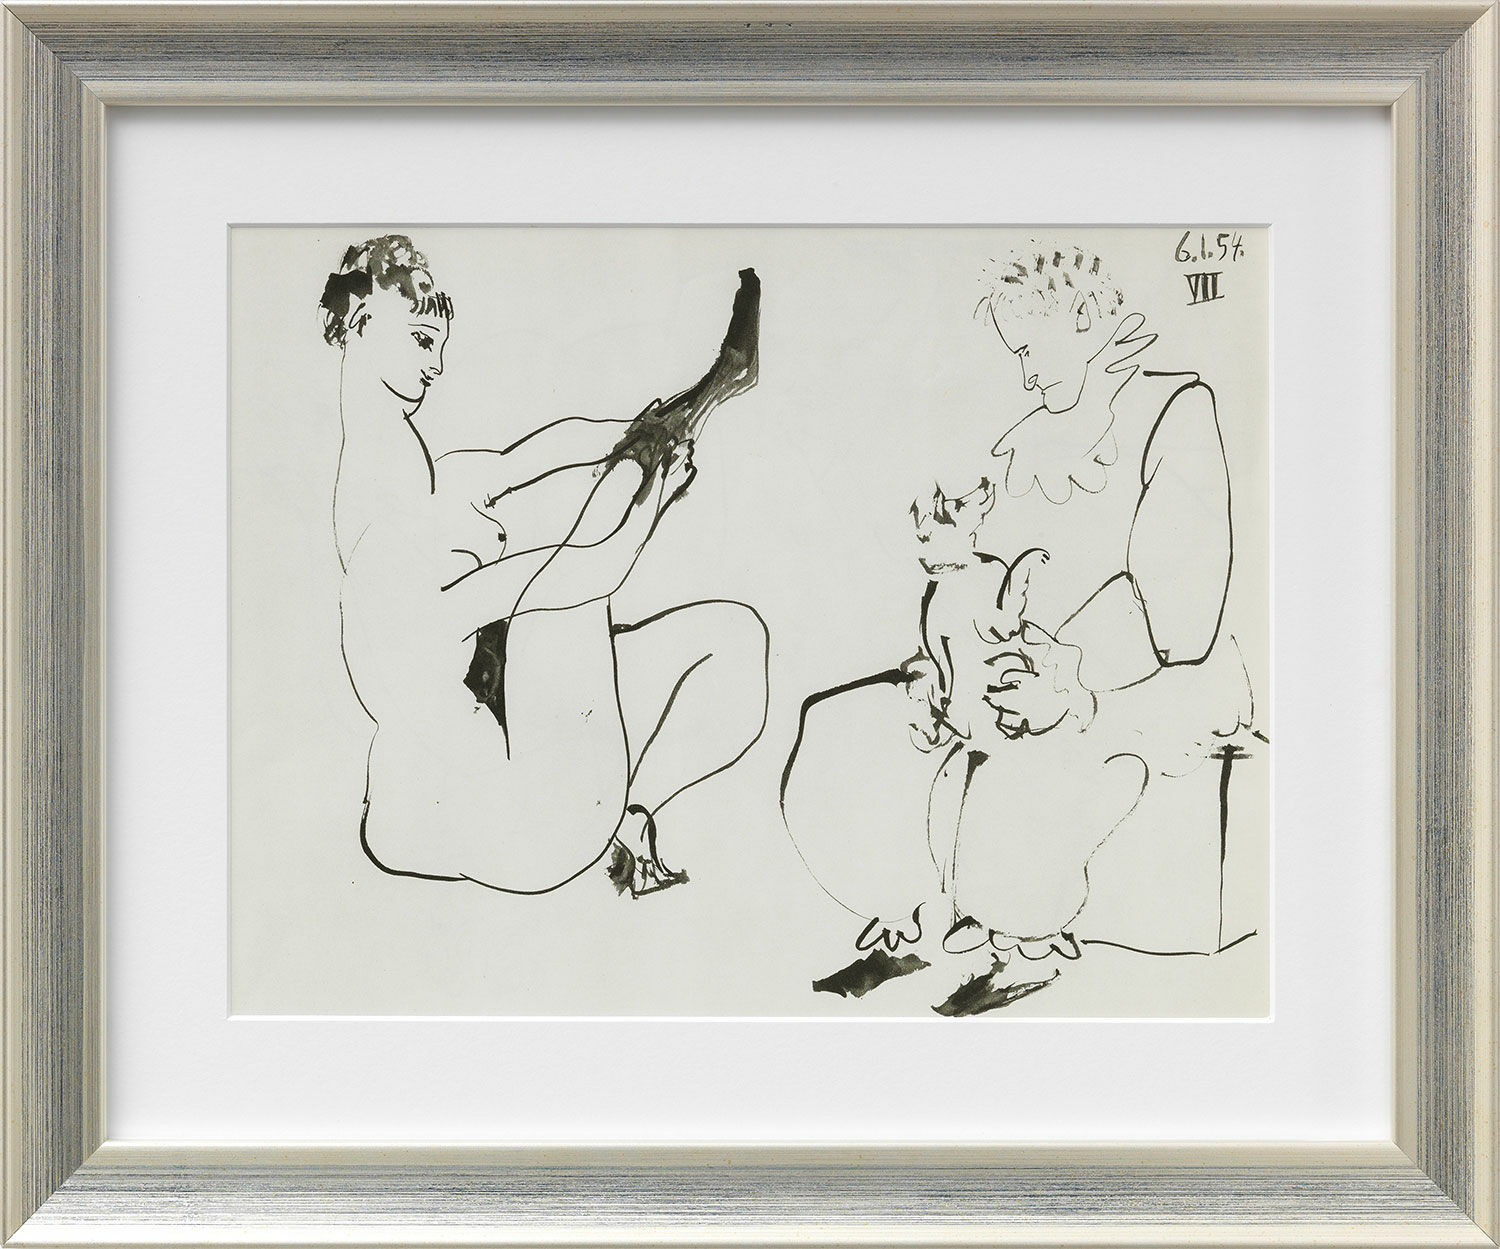 Picture "Untitled" (1953), framed by Pablo Picasso